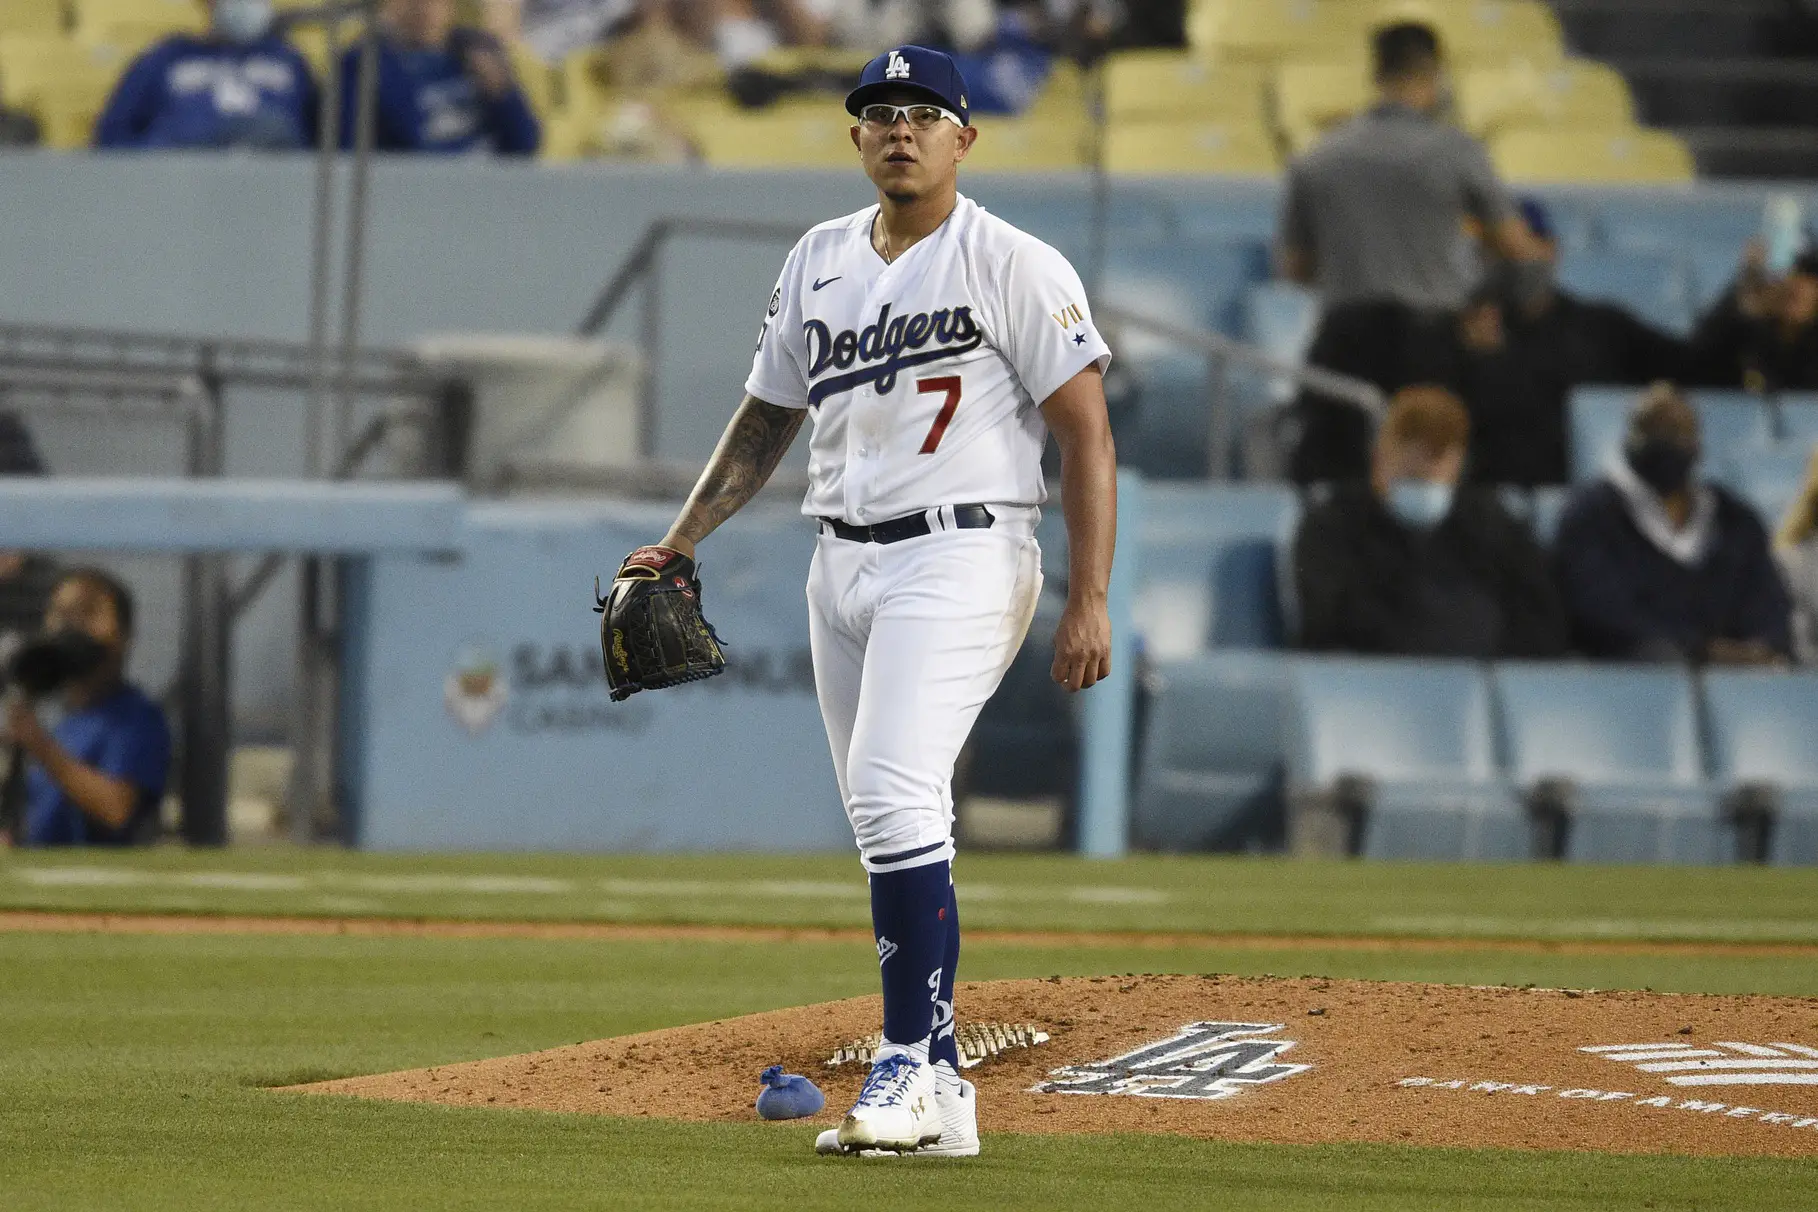 Dodgers News: Julio Urias Will Not Travel With Team Amid Domestic Violence Investigation